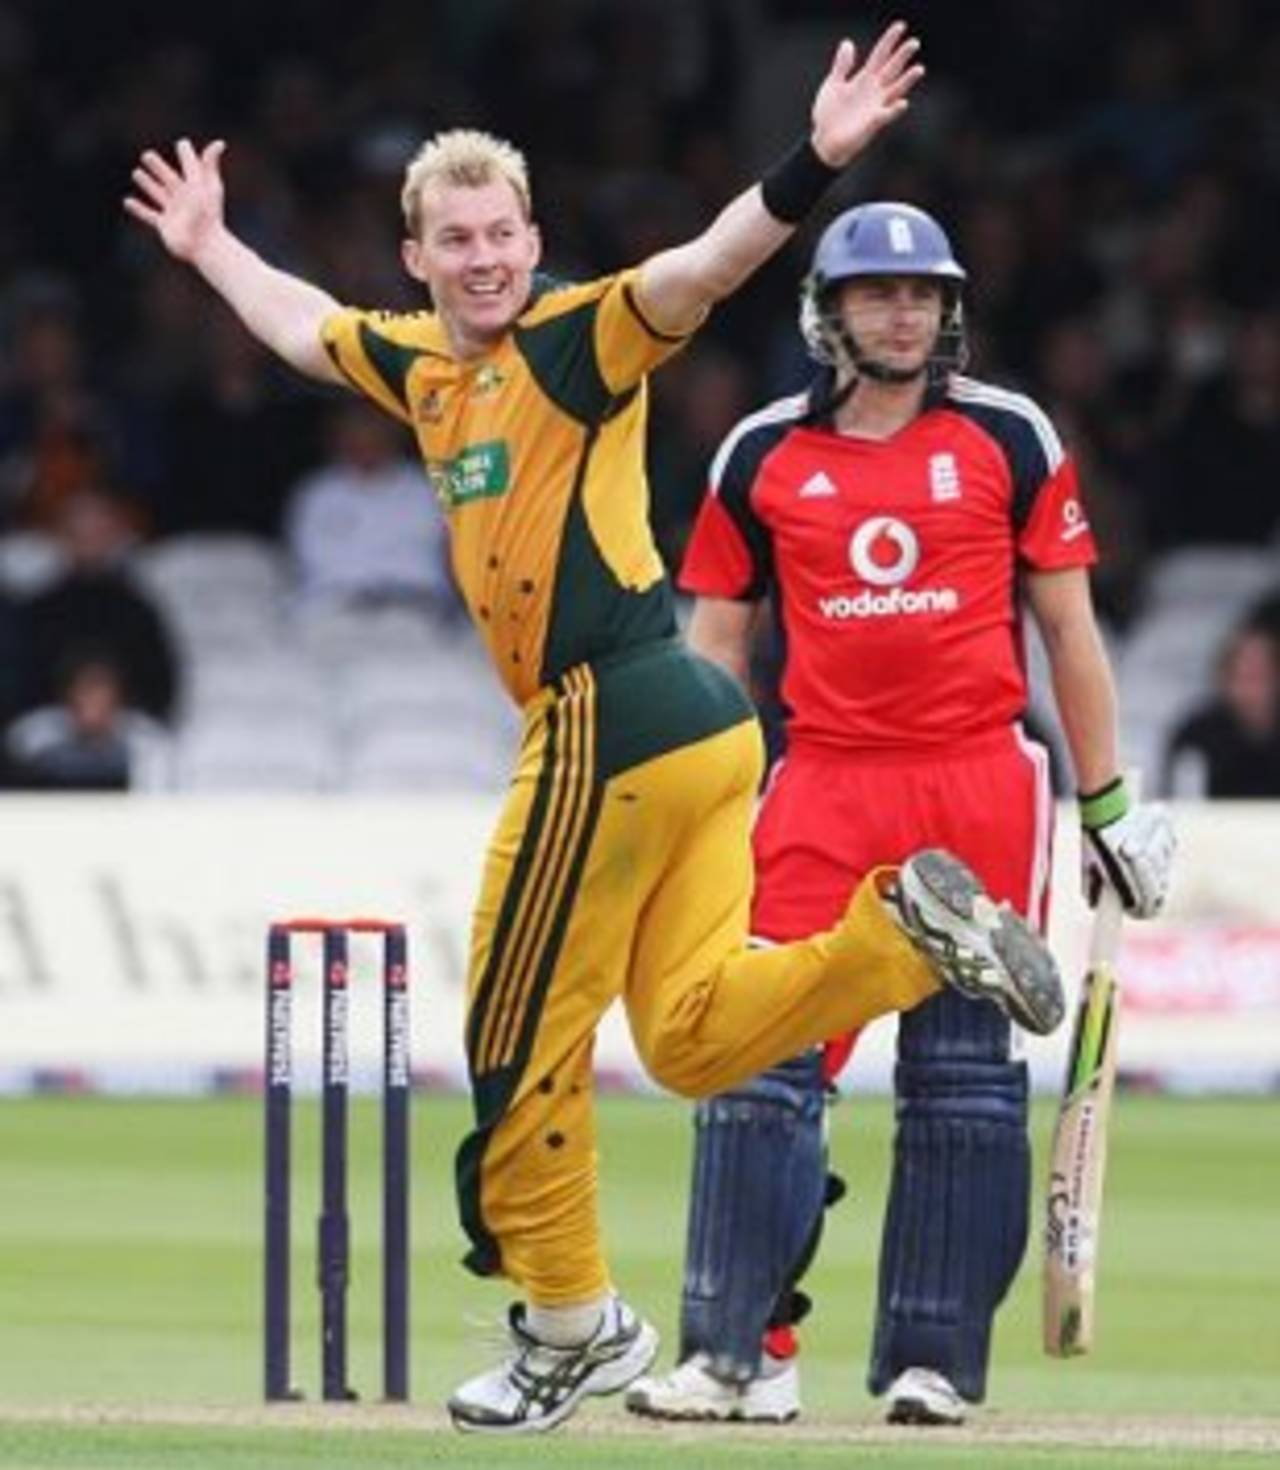 Brett Lee has been an important part of Australia's one-day wins in England&nbsp;&nbsp;&bull;&nbsp;&nbsp;Getty Images